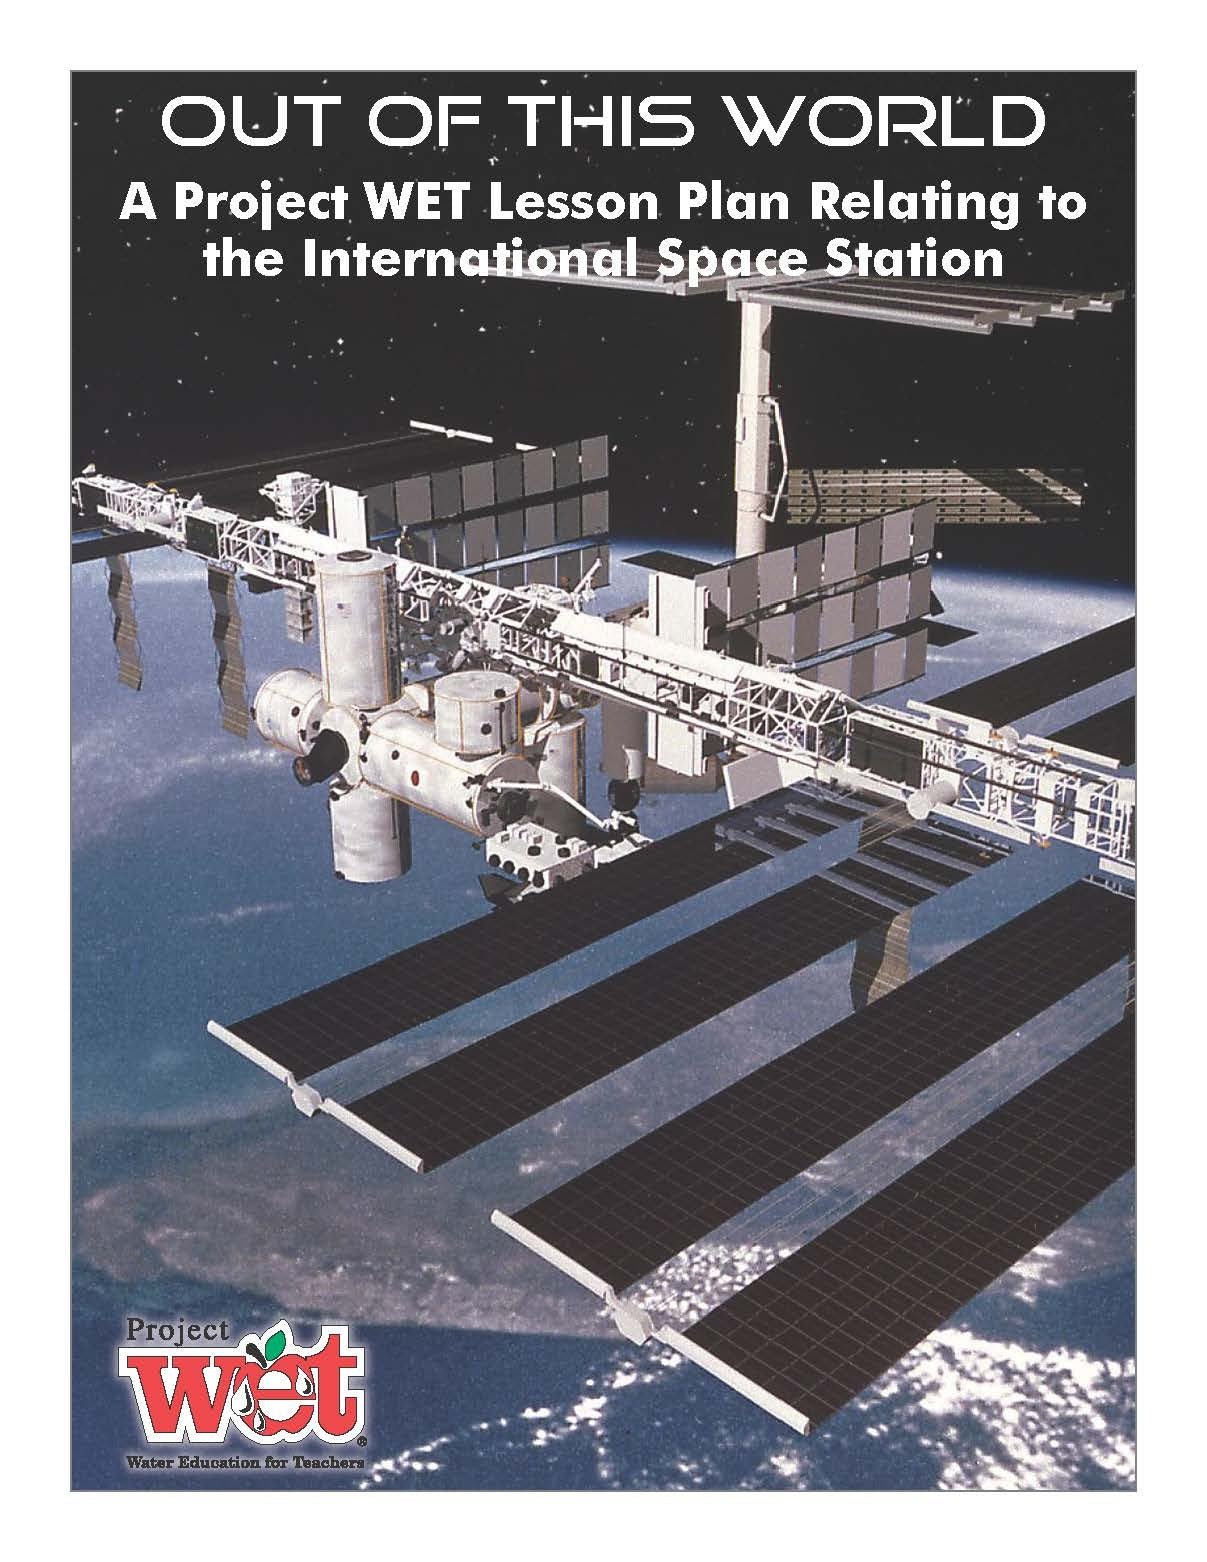 Out of This World Lesson Plan